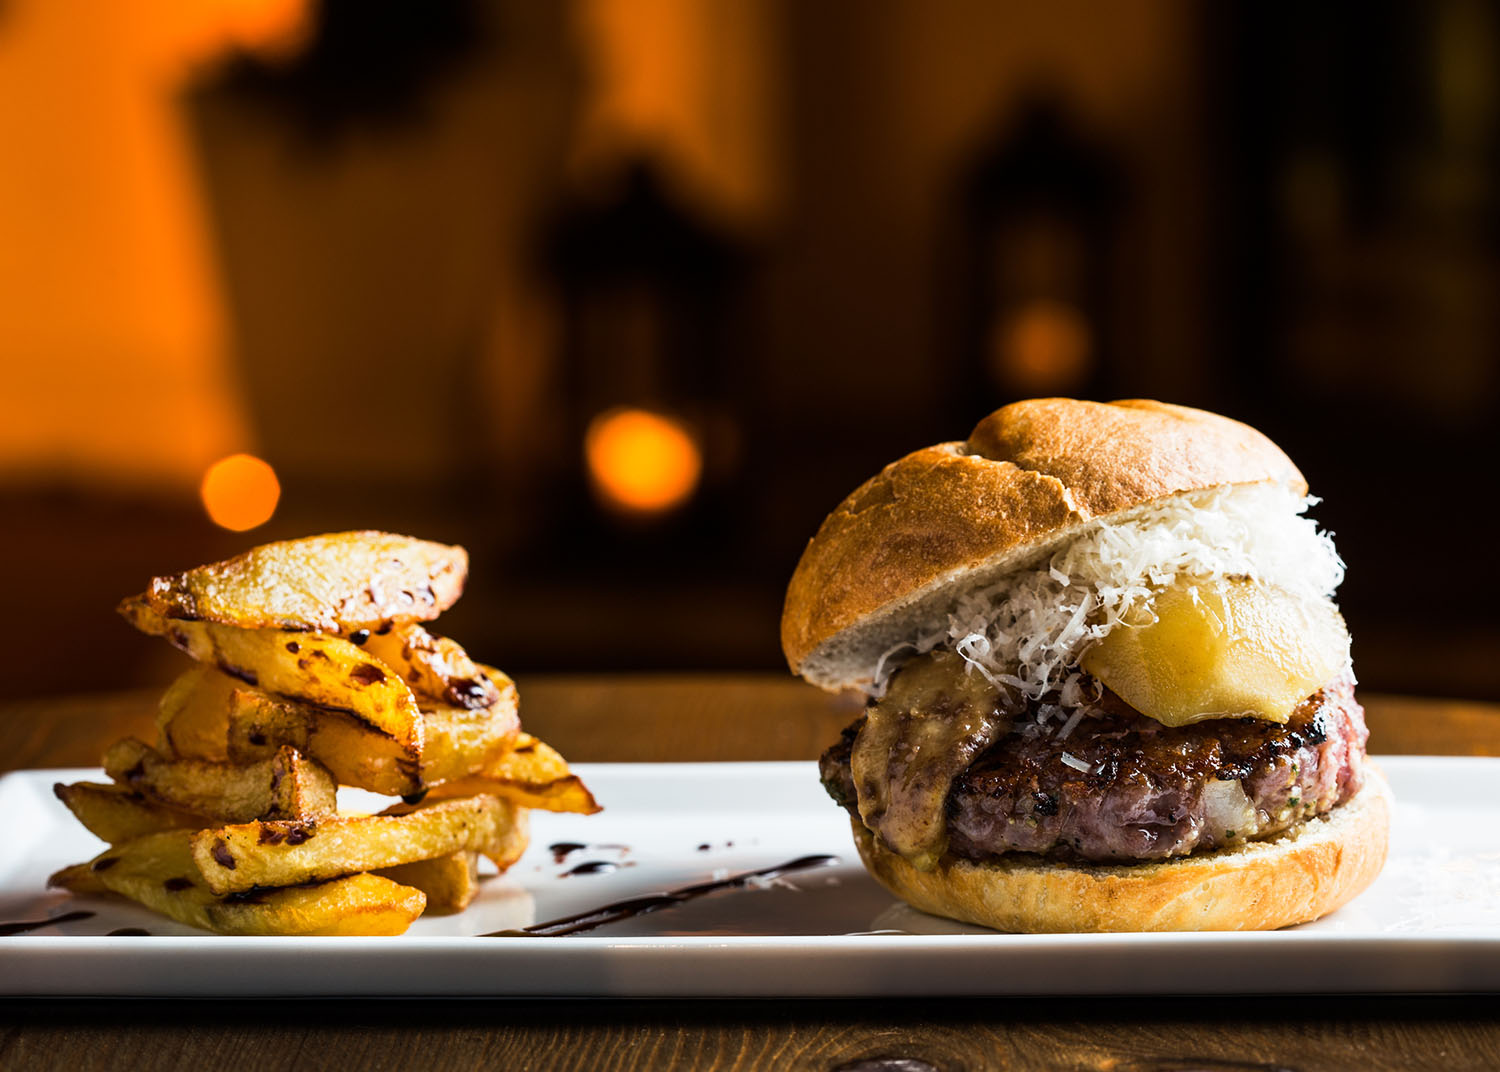 Grilled burger with foie grass, pear, cheese and fries.